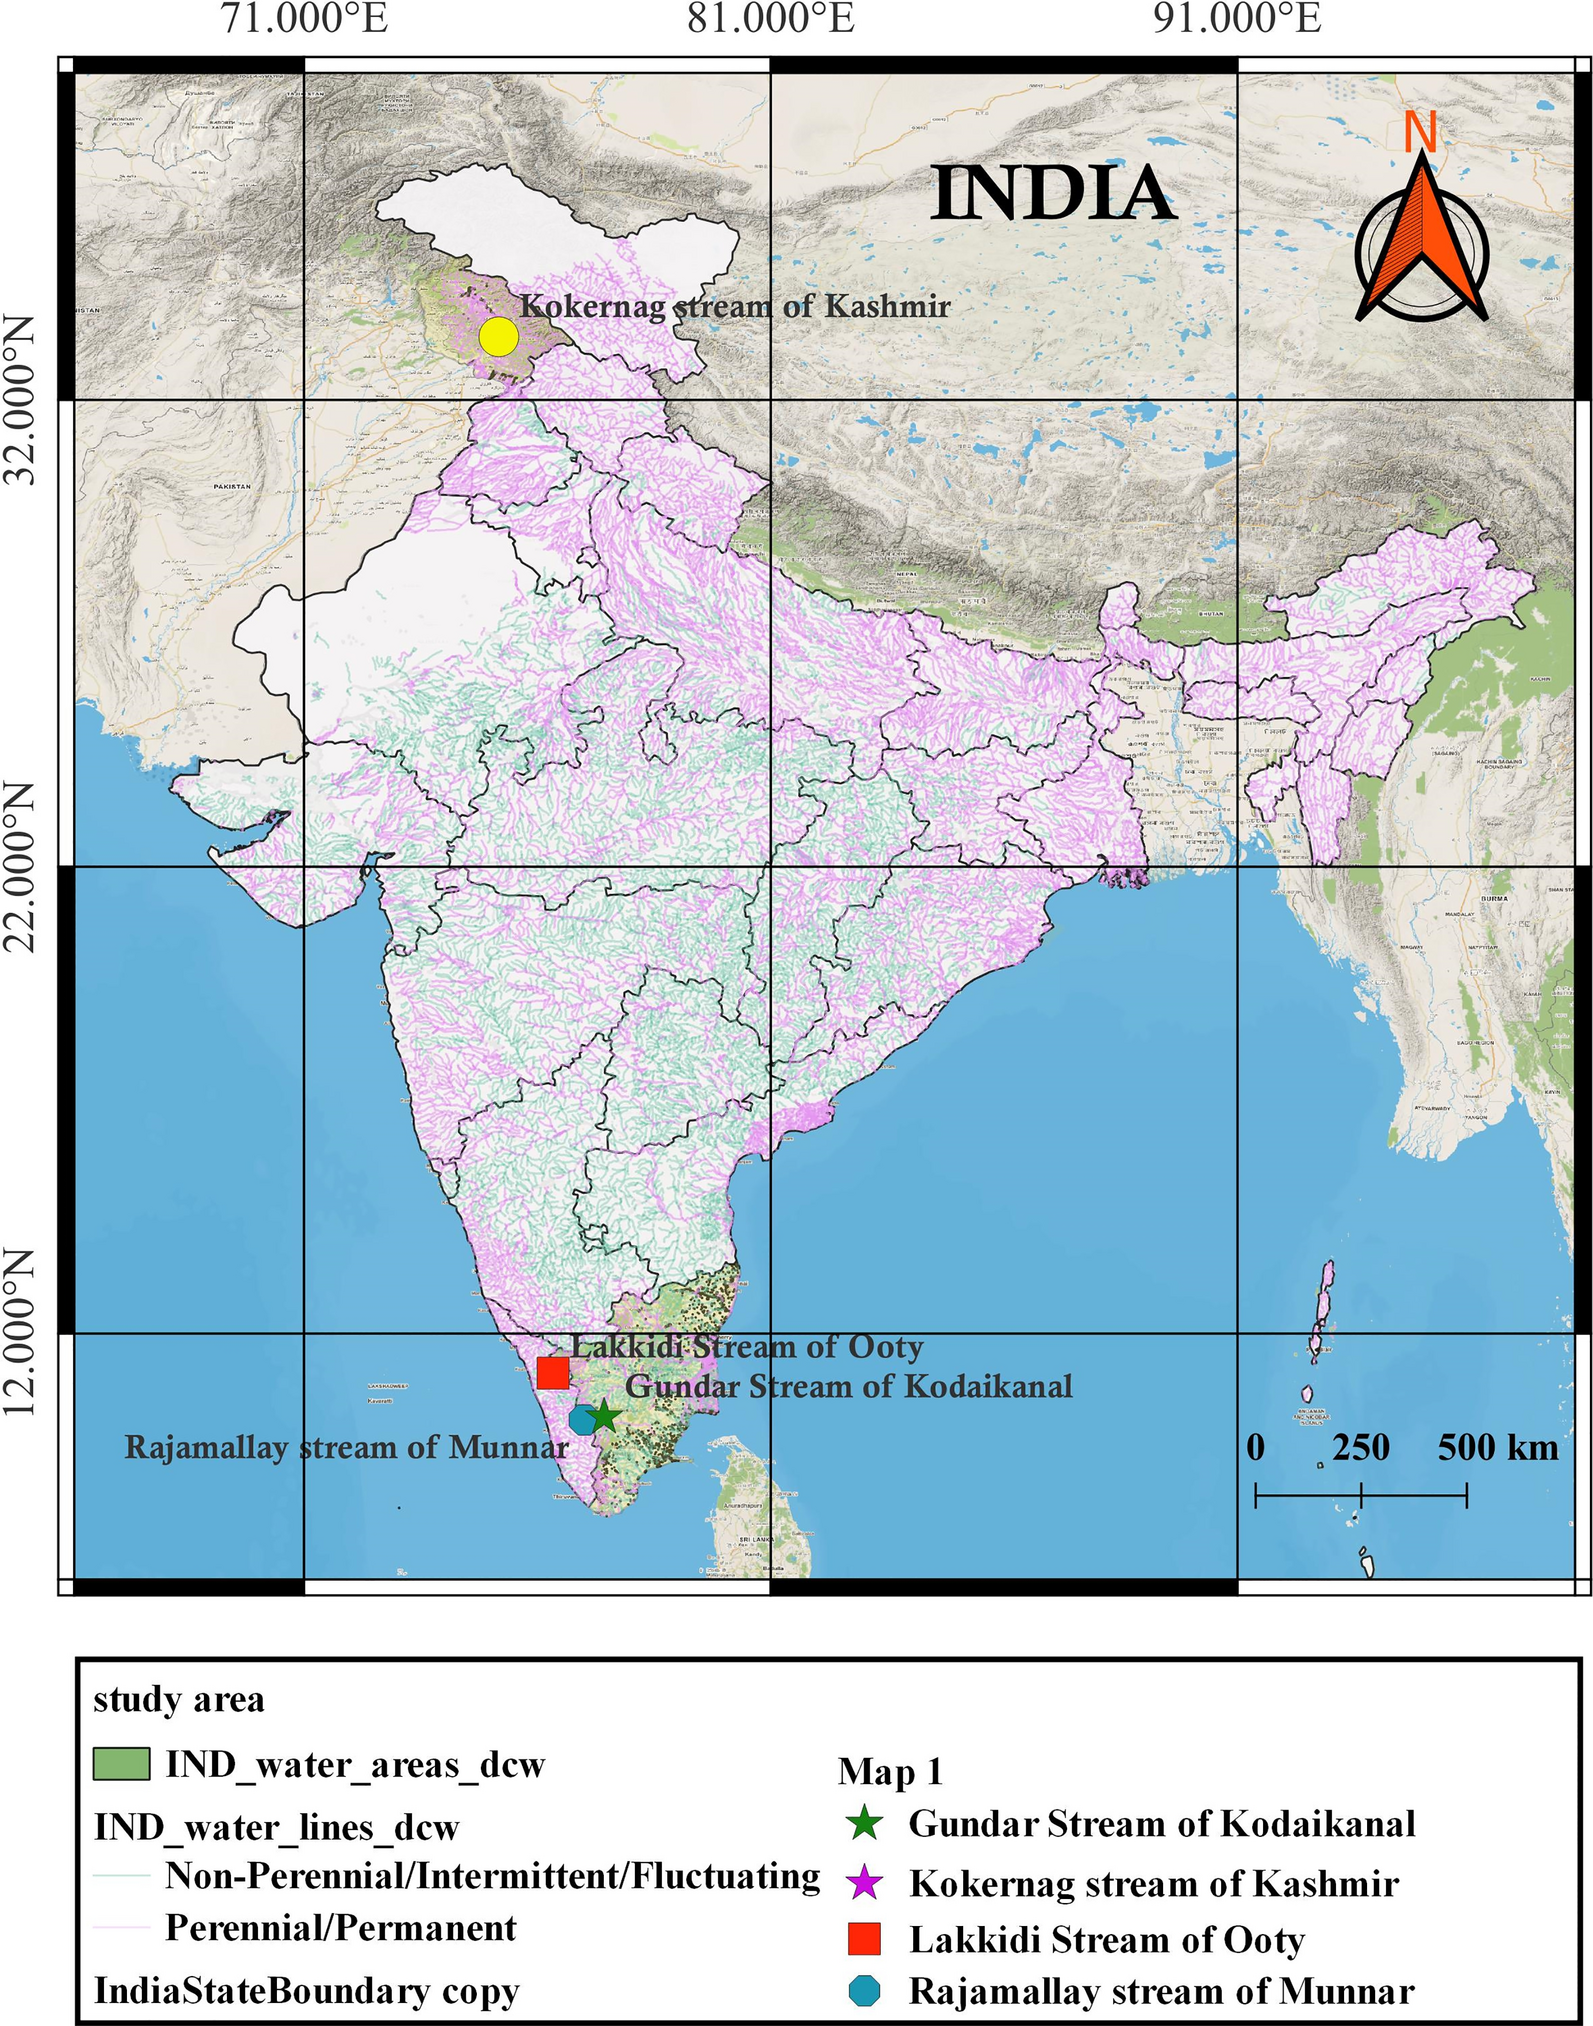 Estimation of genetic diversity of the exotic Indian trout populations by using microsatellite markers